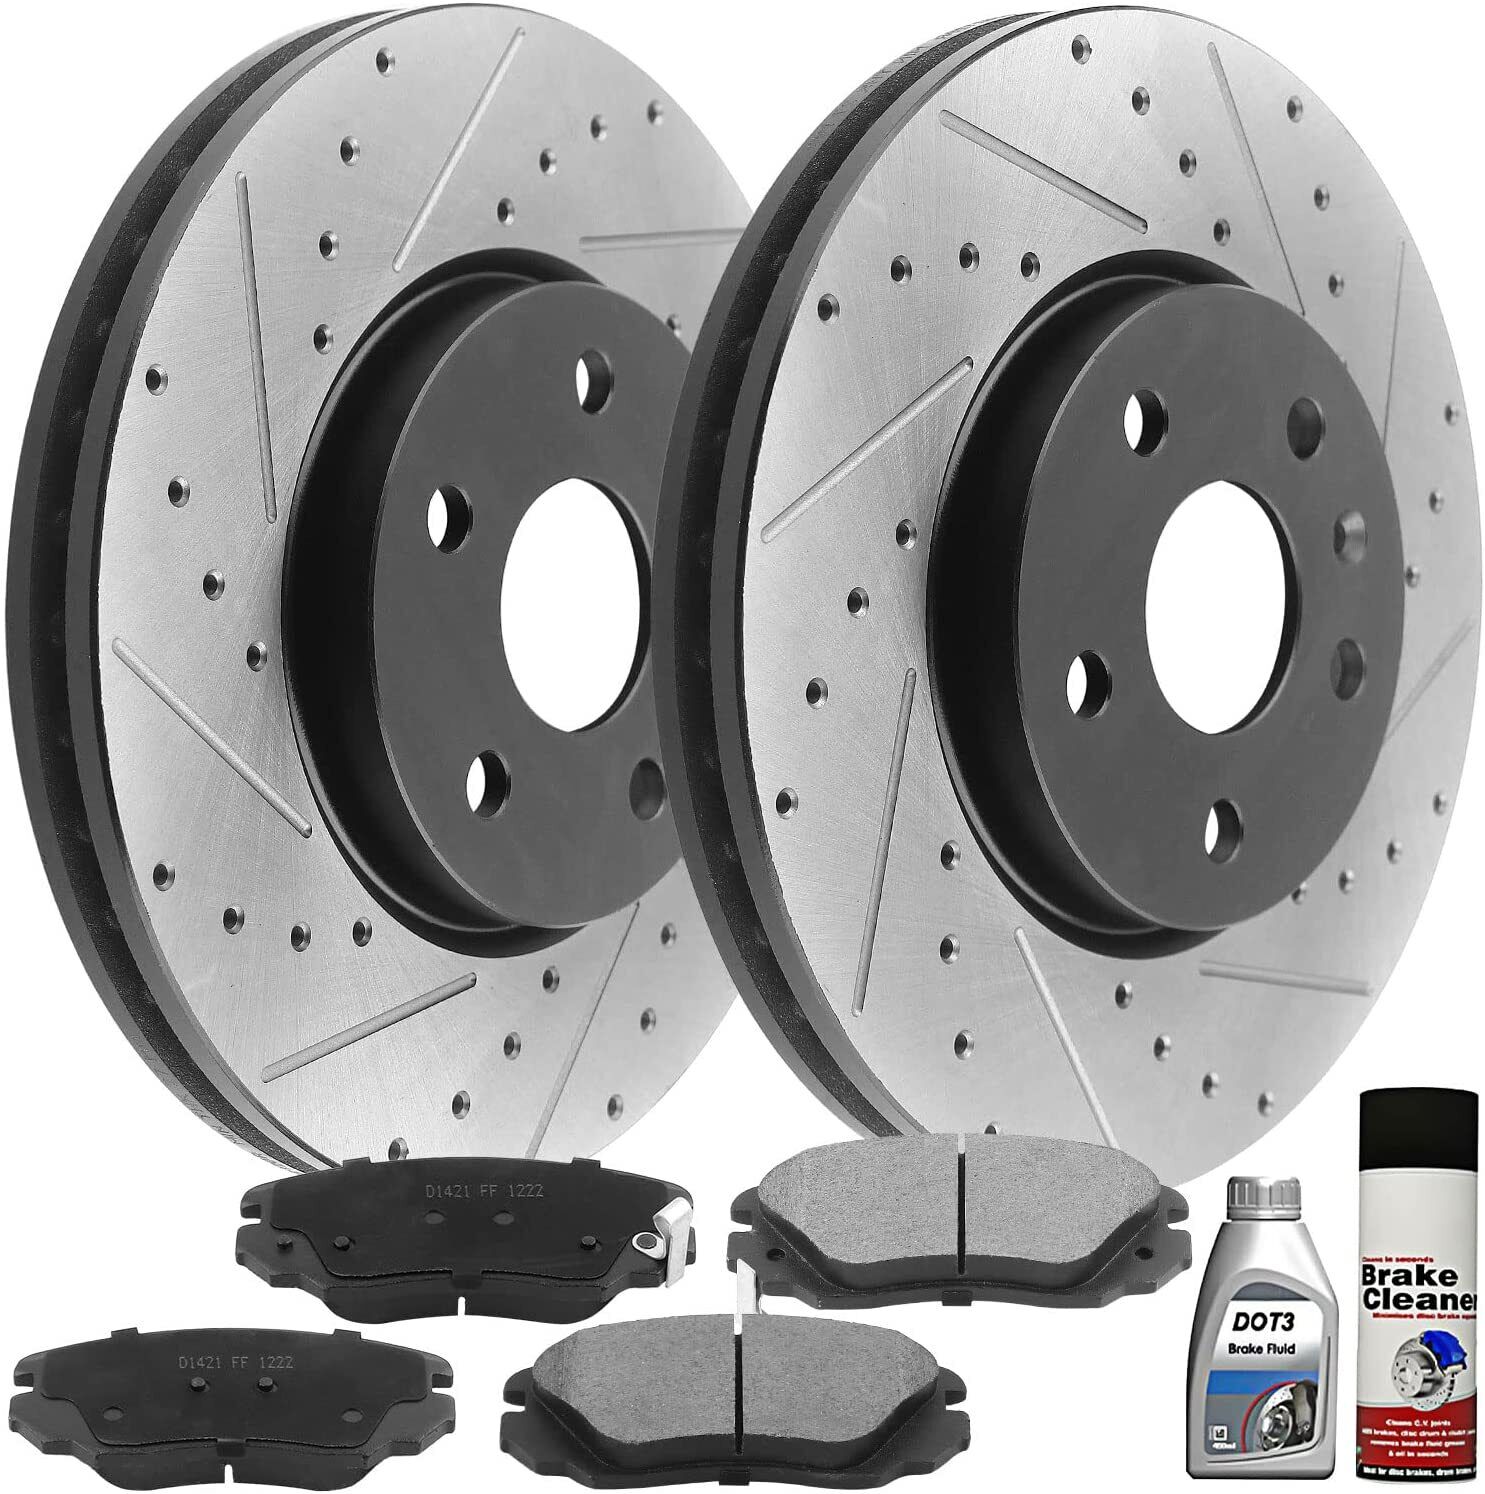 Brake Rotors With 5 Lugs Front for Buick Regal Chevy Malibu Equinox NJ D26